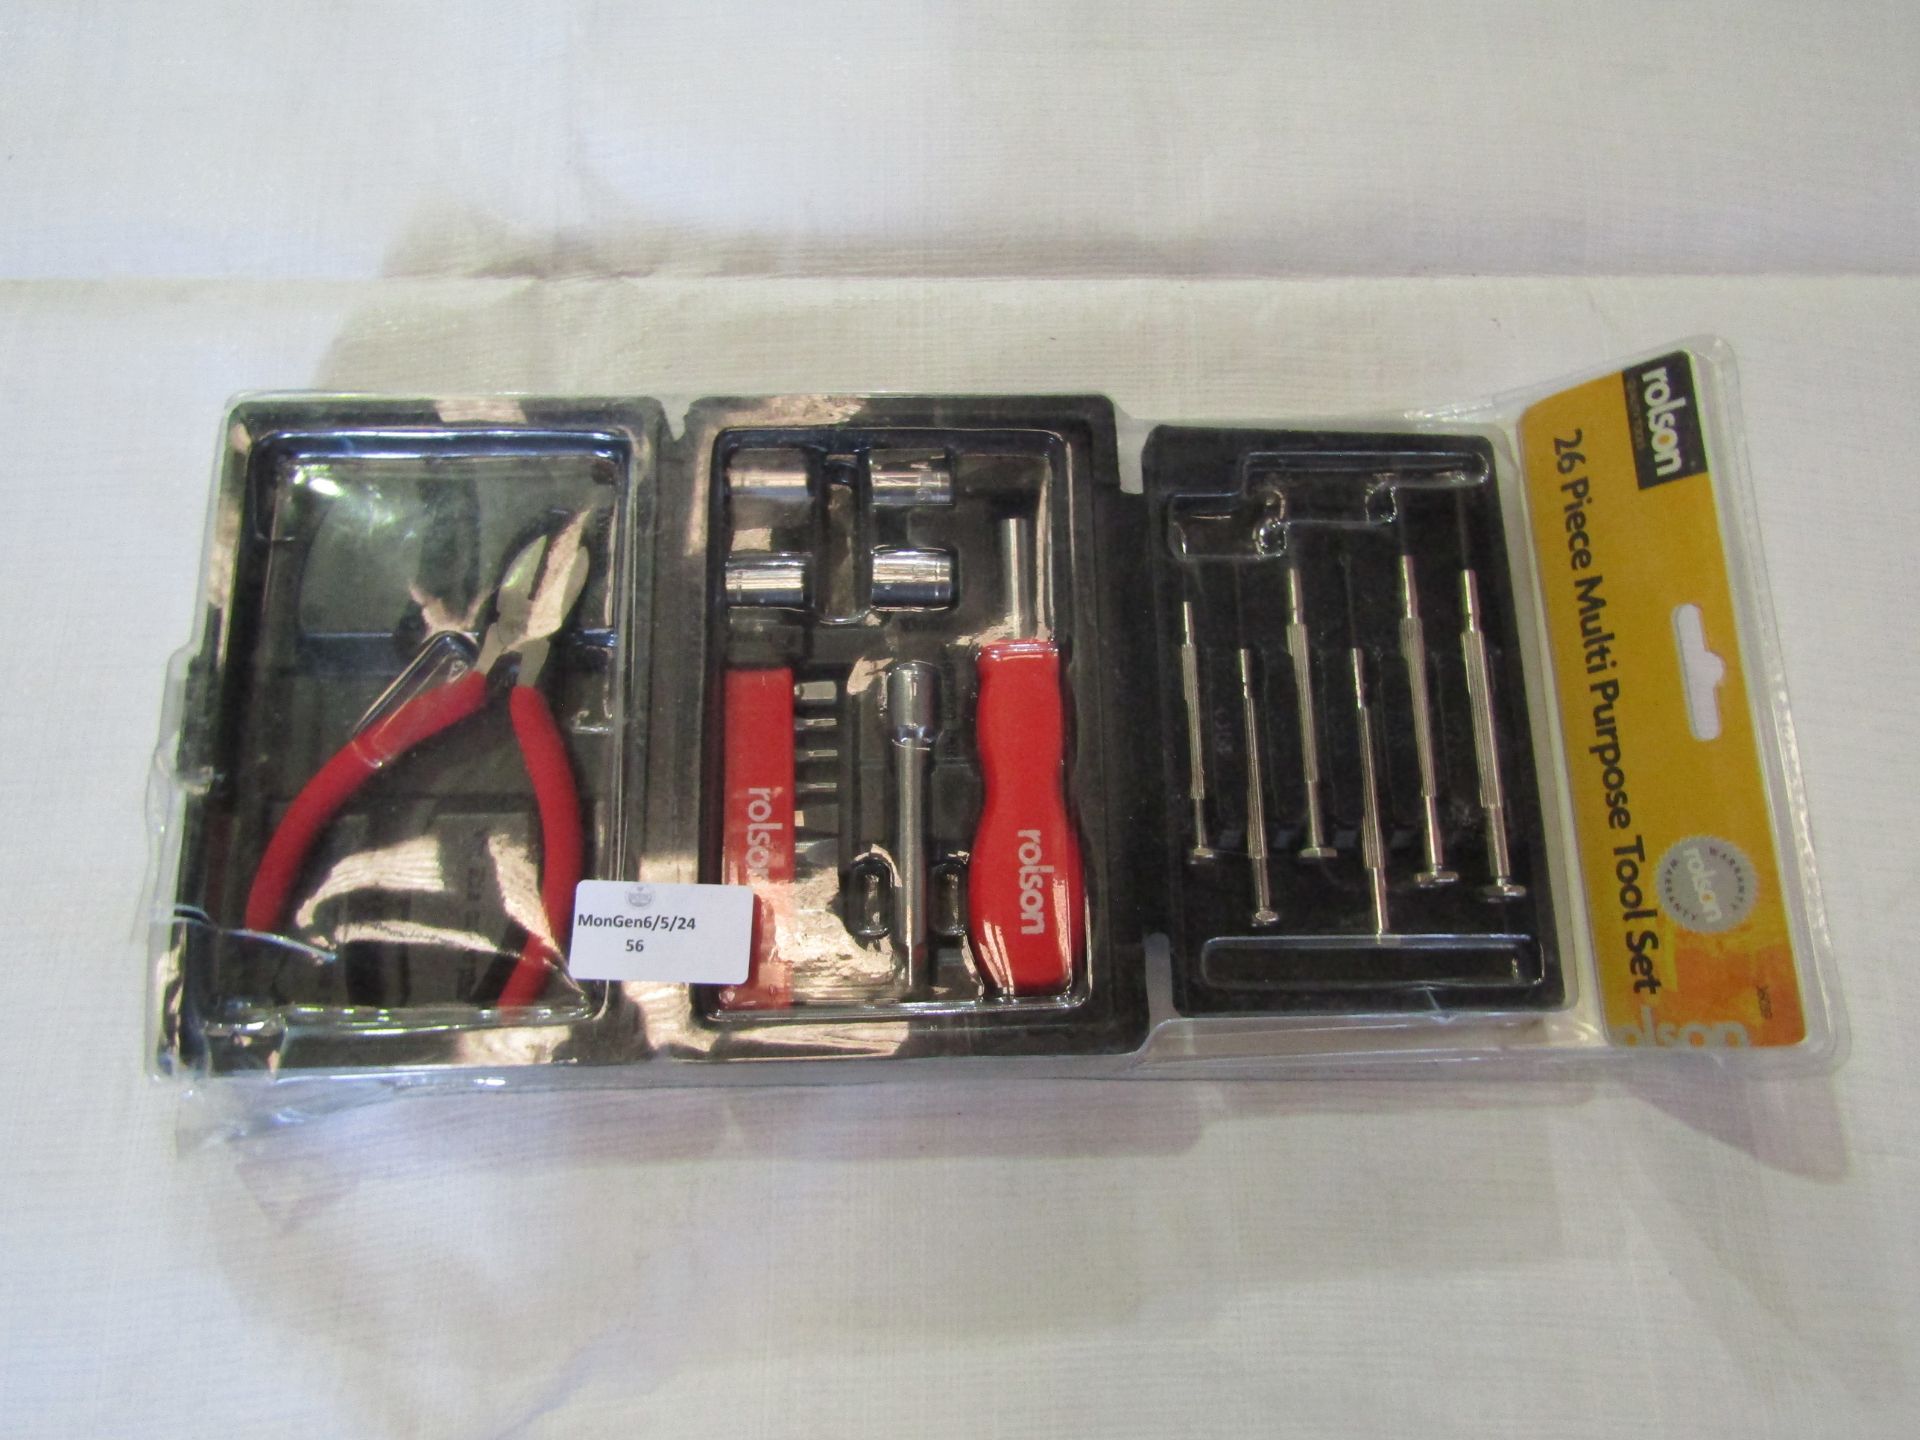 Rolson 26 Piece Multi Purpose Tool Set - Please Note One Item Is Missing But The Rest Is Present